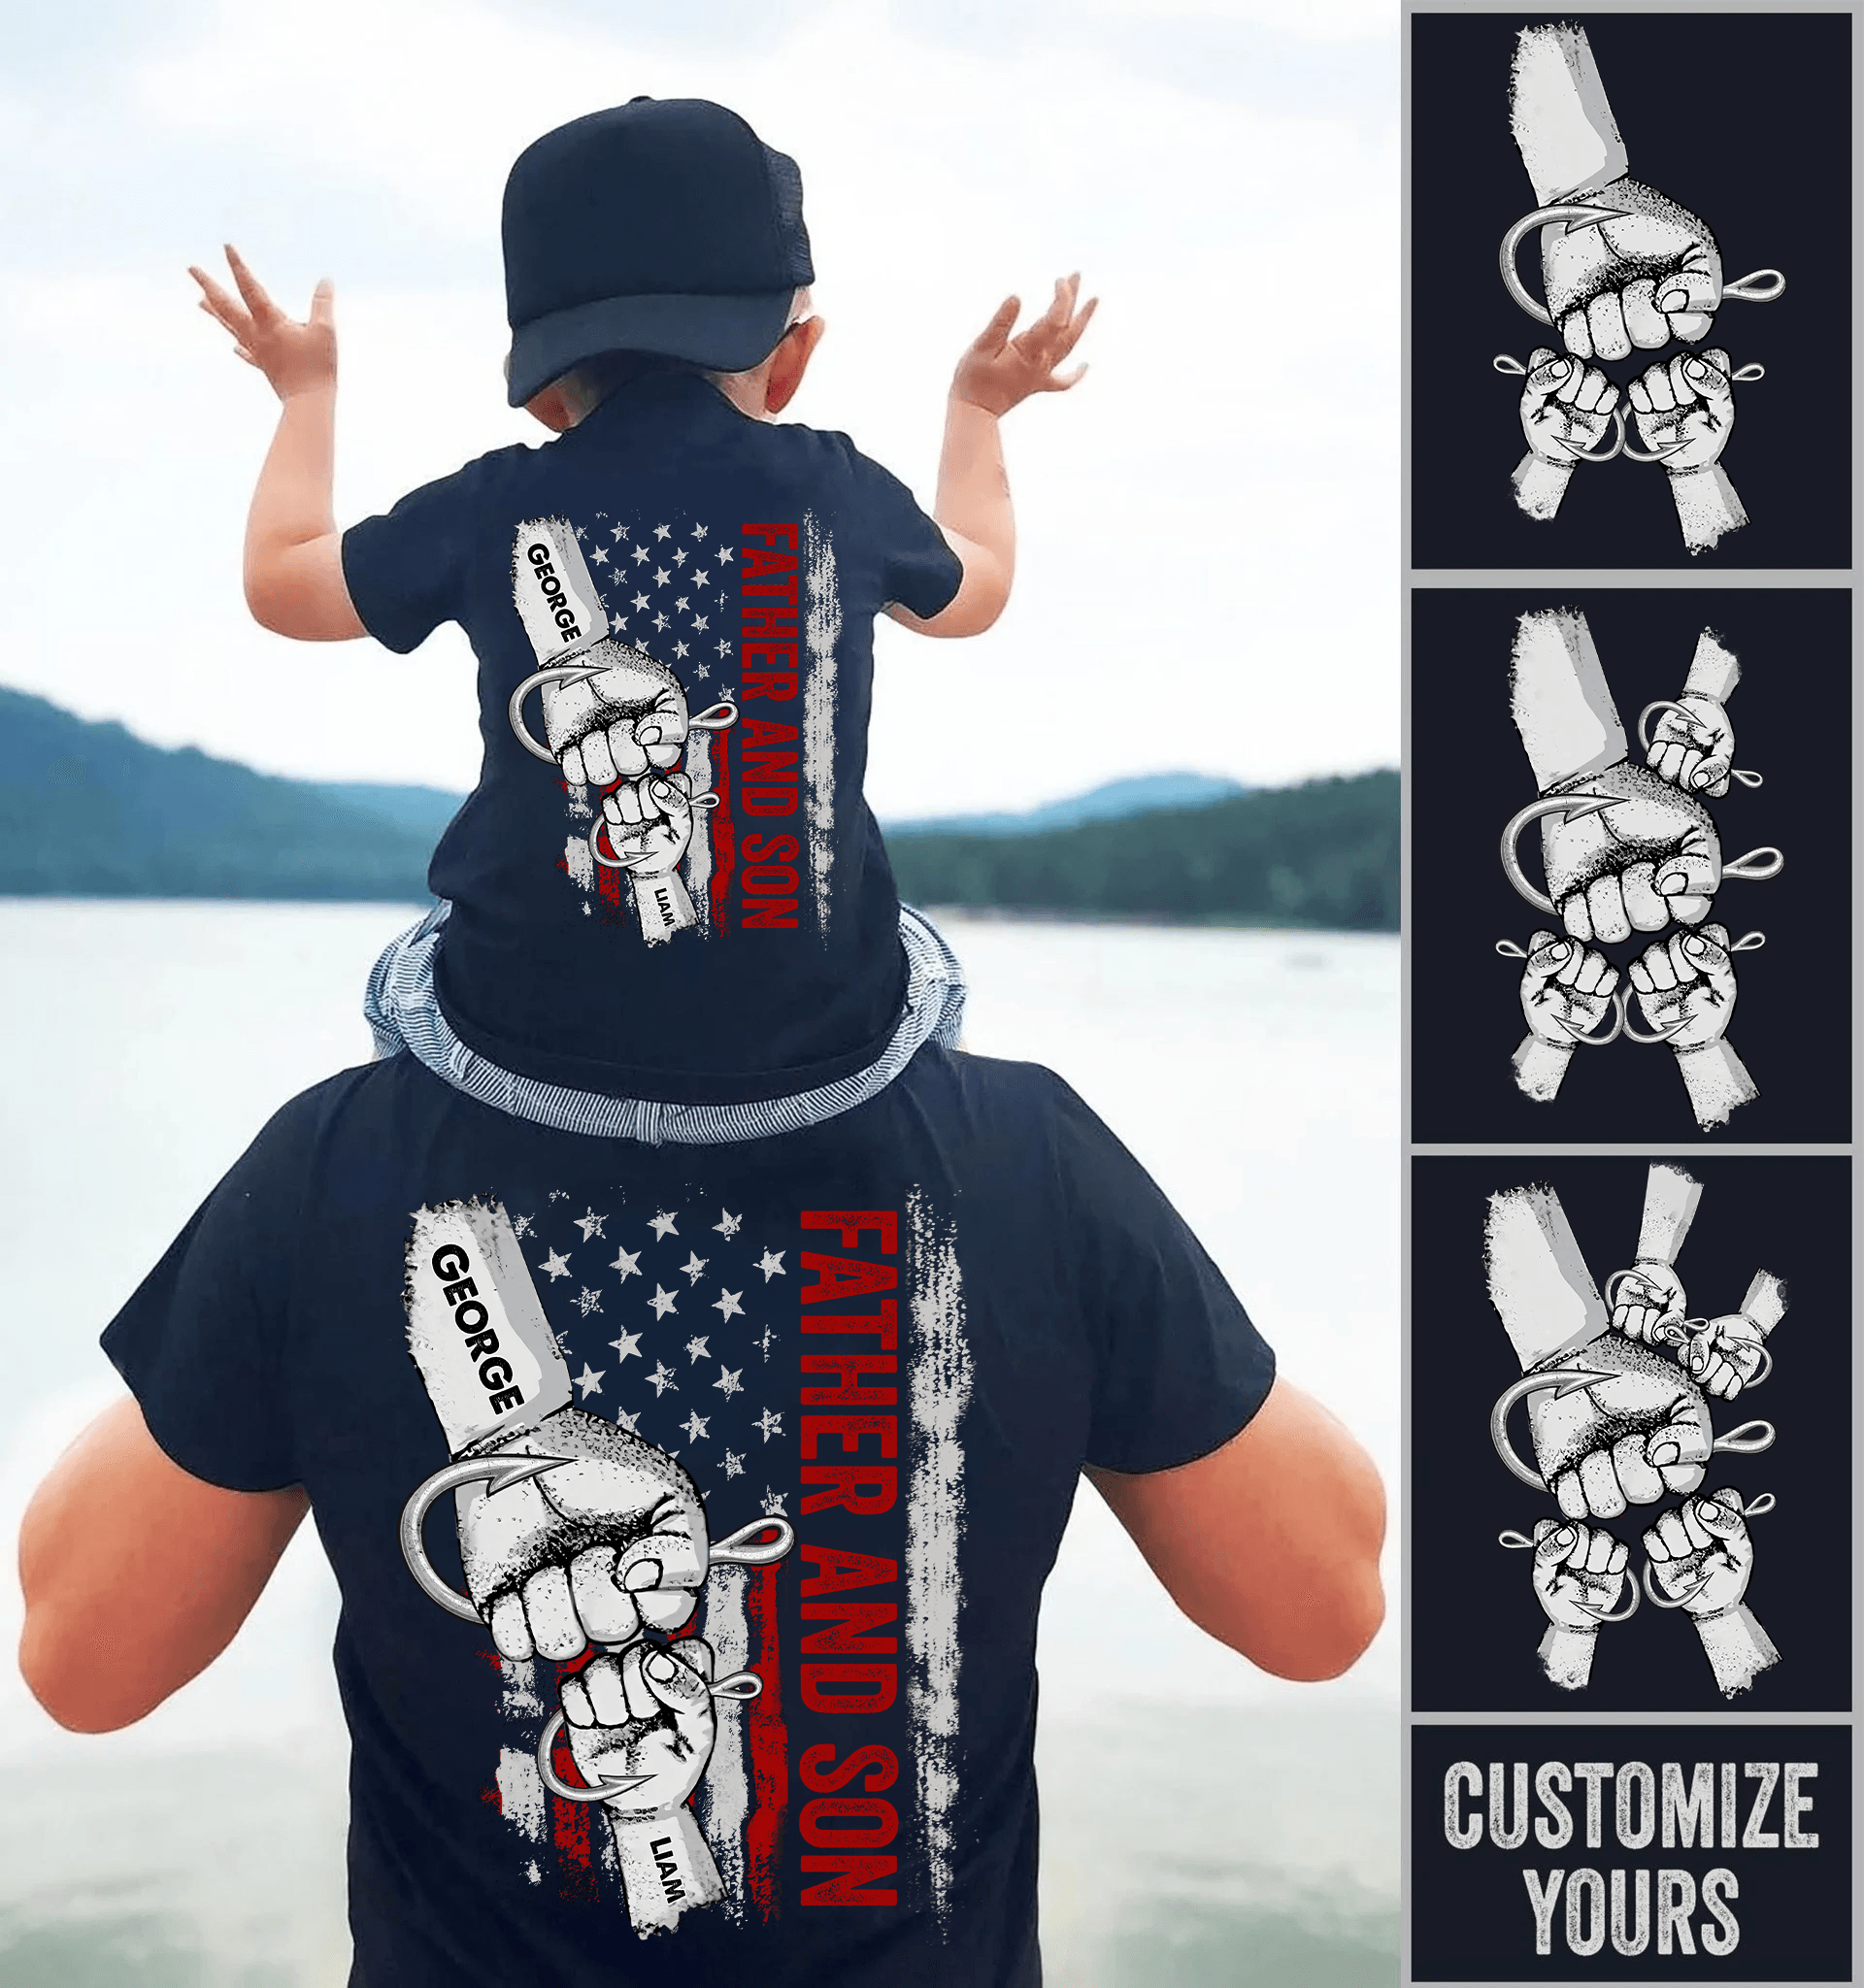 We Hooked The Best Dad Raised Fist Bump - Personalized Custom Back Printed Fishing T Shirt - Father's Day Funny Gift for Dad, Grandpa, Daddy, Dada, Husband, Dad Jokes, Reel Cool Dad - Suzitee Store